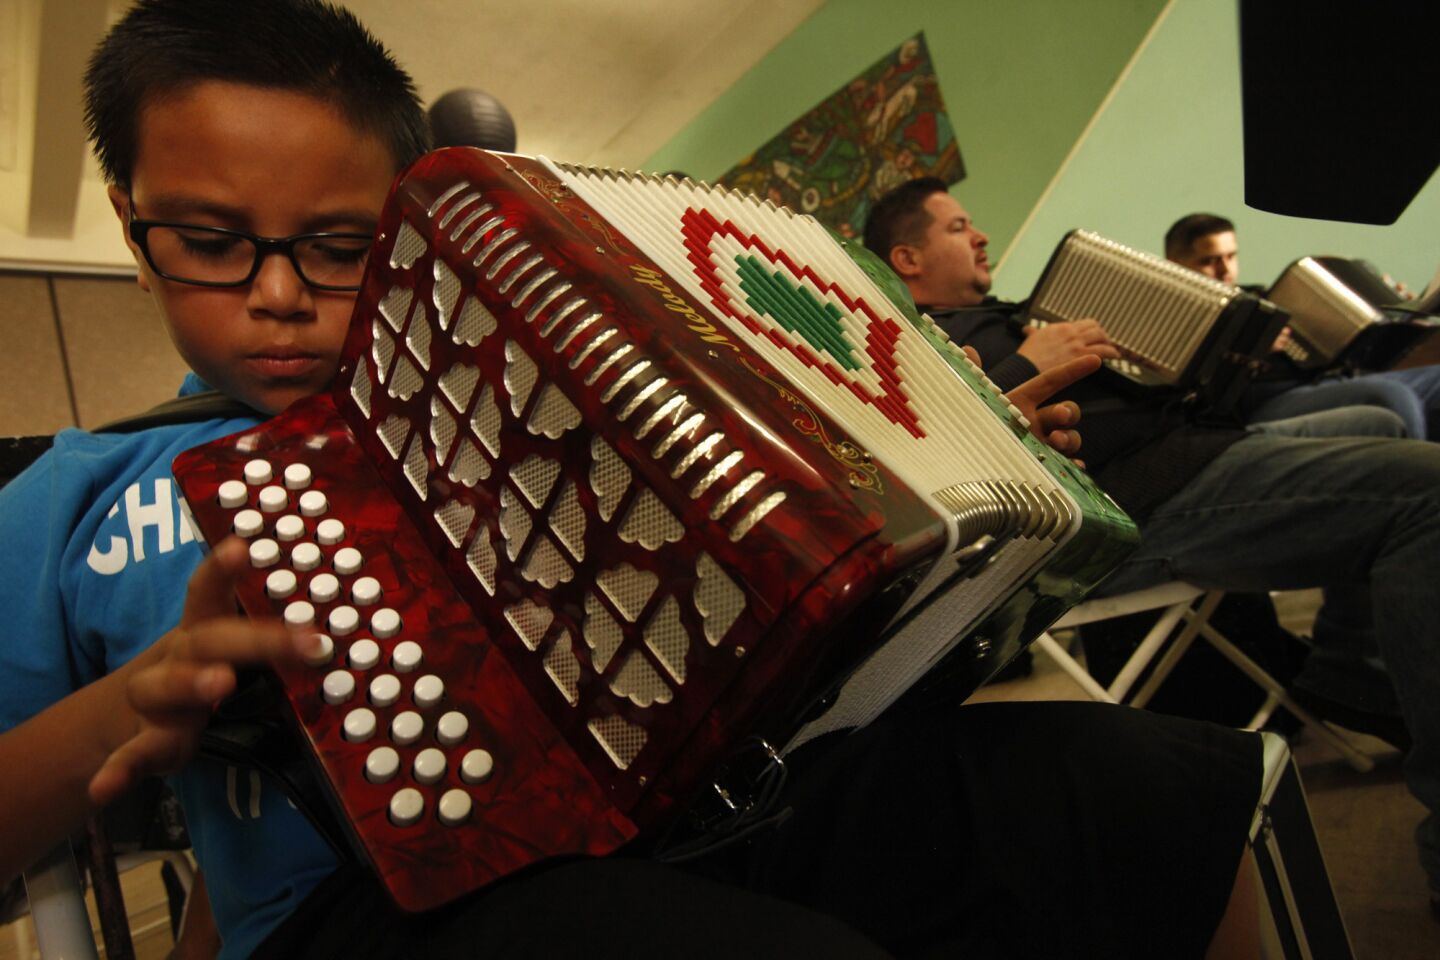 Accordion students Jason Sanchez, left, George Magallanes and Eduardo Rocha learn a new song while Ontono Lujan, not shown, teaches them how to play the button accordion during his weekly Saturday morning class at Plaza de La Raza in Los Angeles. Unlike in American culture, where the accordion is sometimes considered nerdy, in Latino culture it's often quite revered.